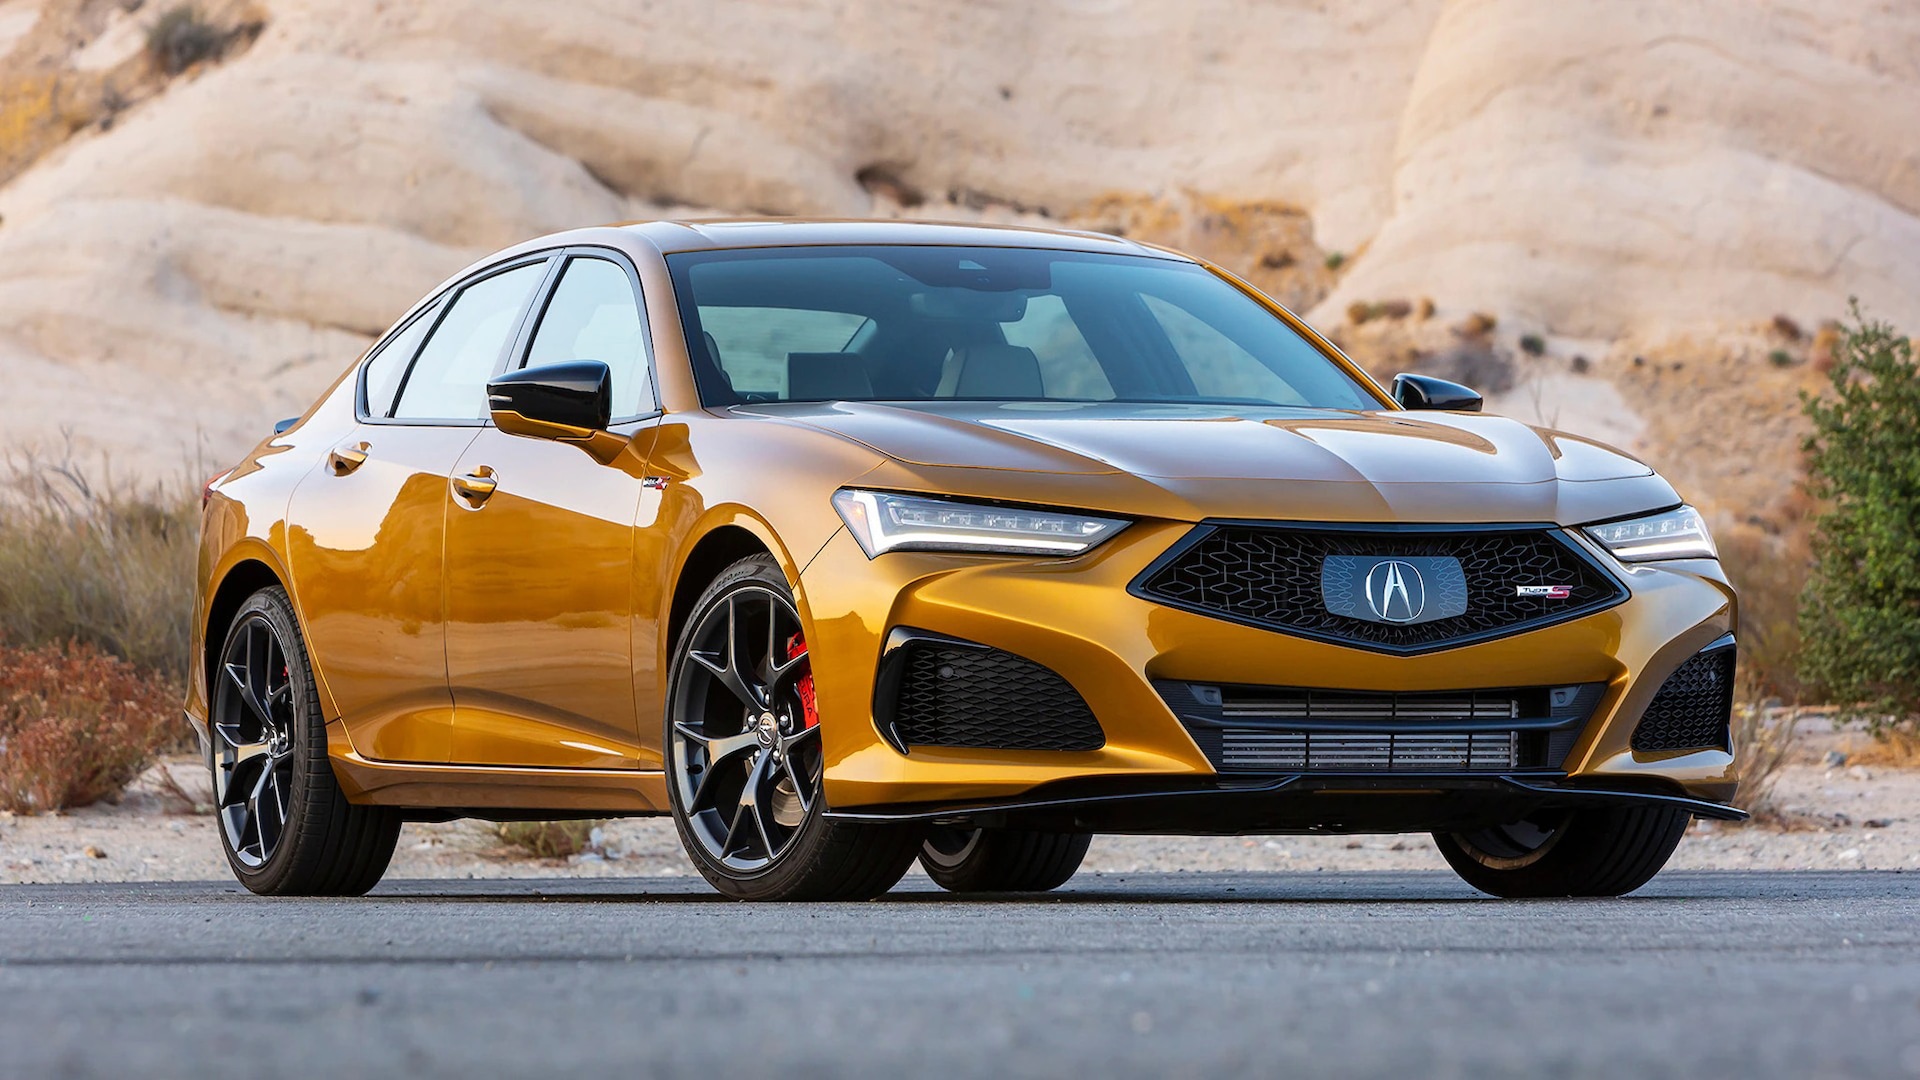 2022 Acura TLX Prices, Reviews, and Photos - MotorTrend